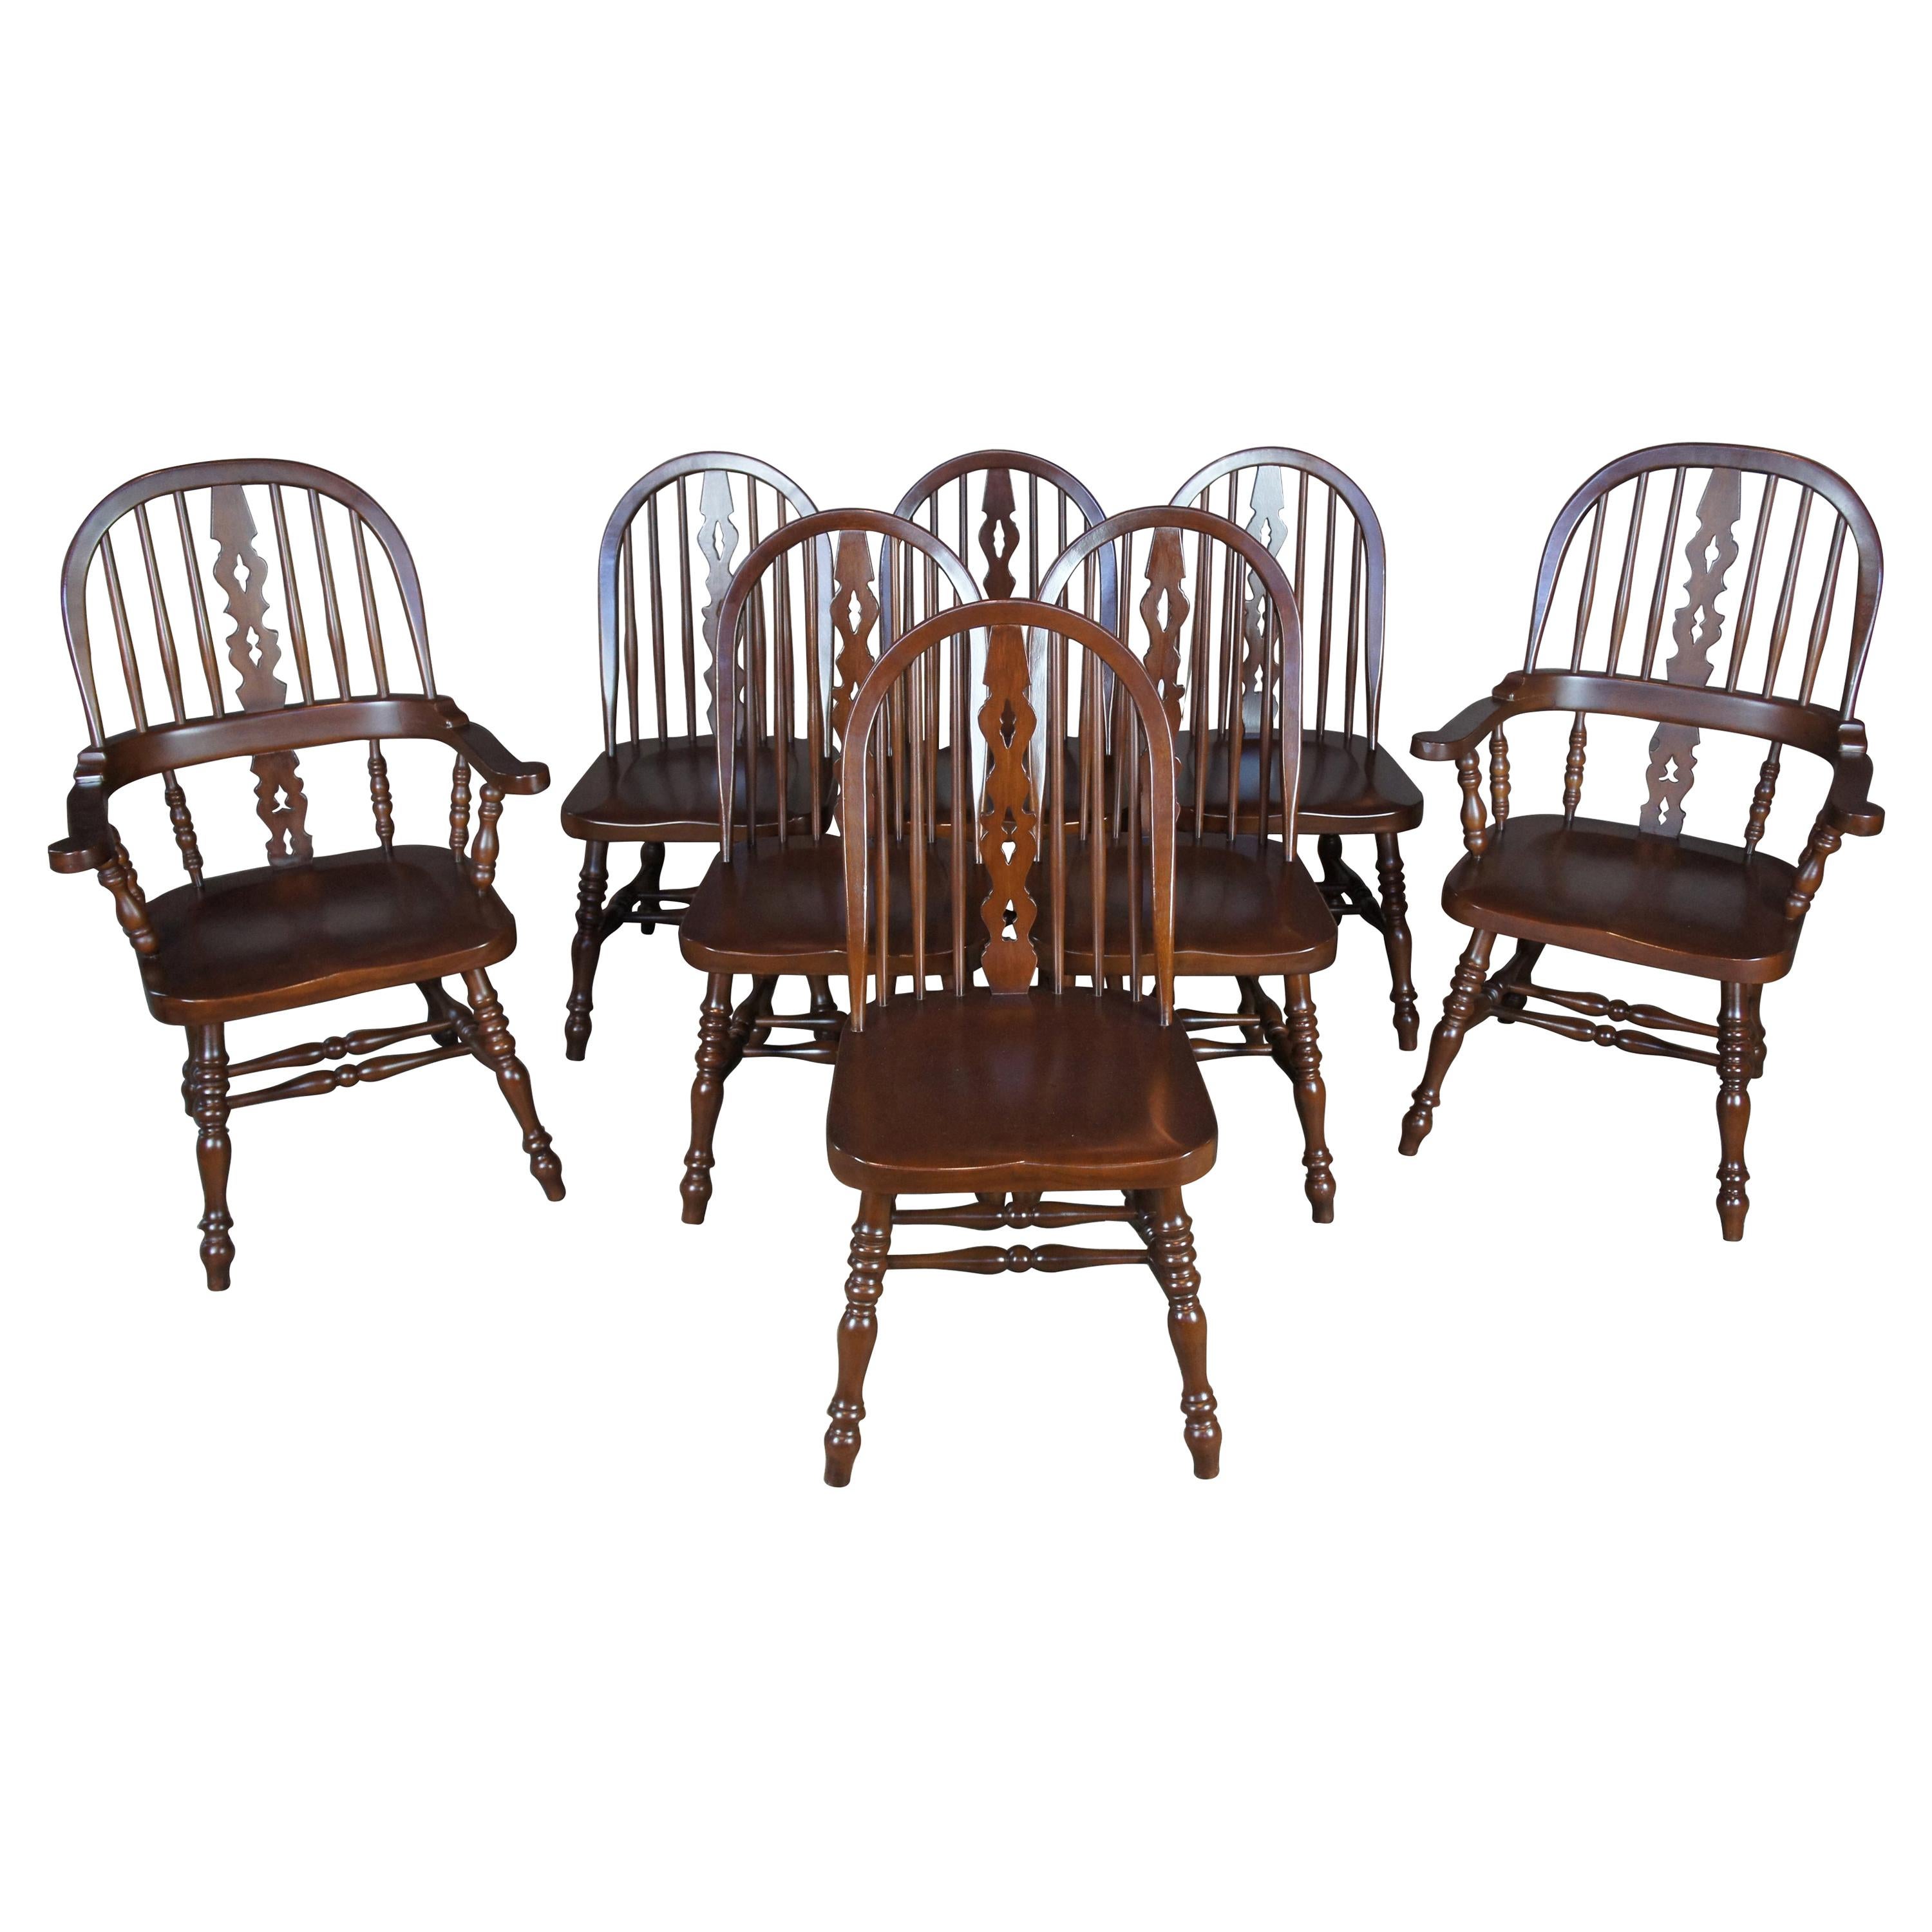 8 Solid Mahogany English Windsor Style Spindle Back Dining Chairs